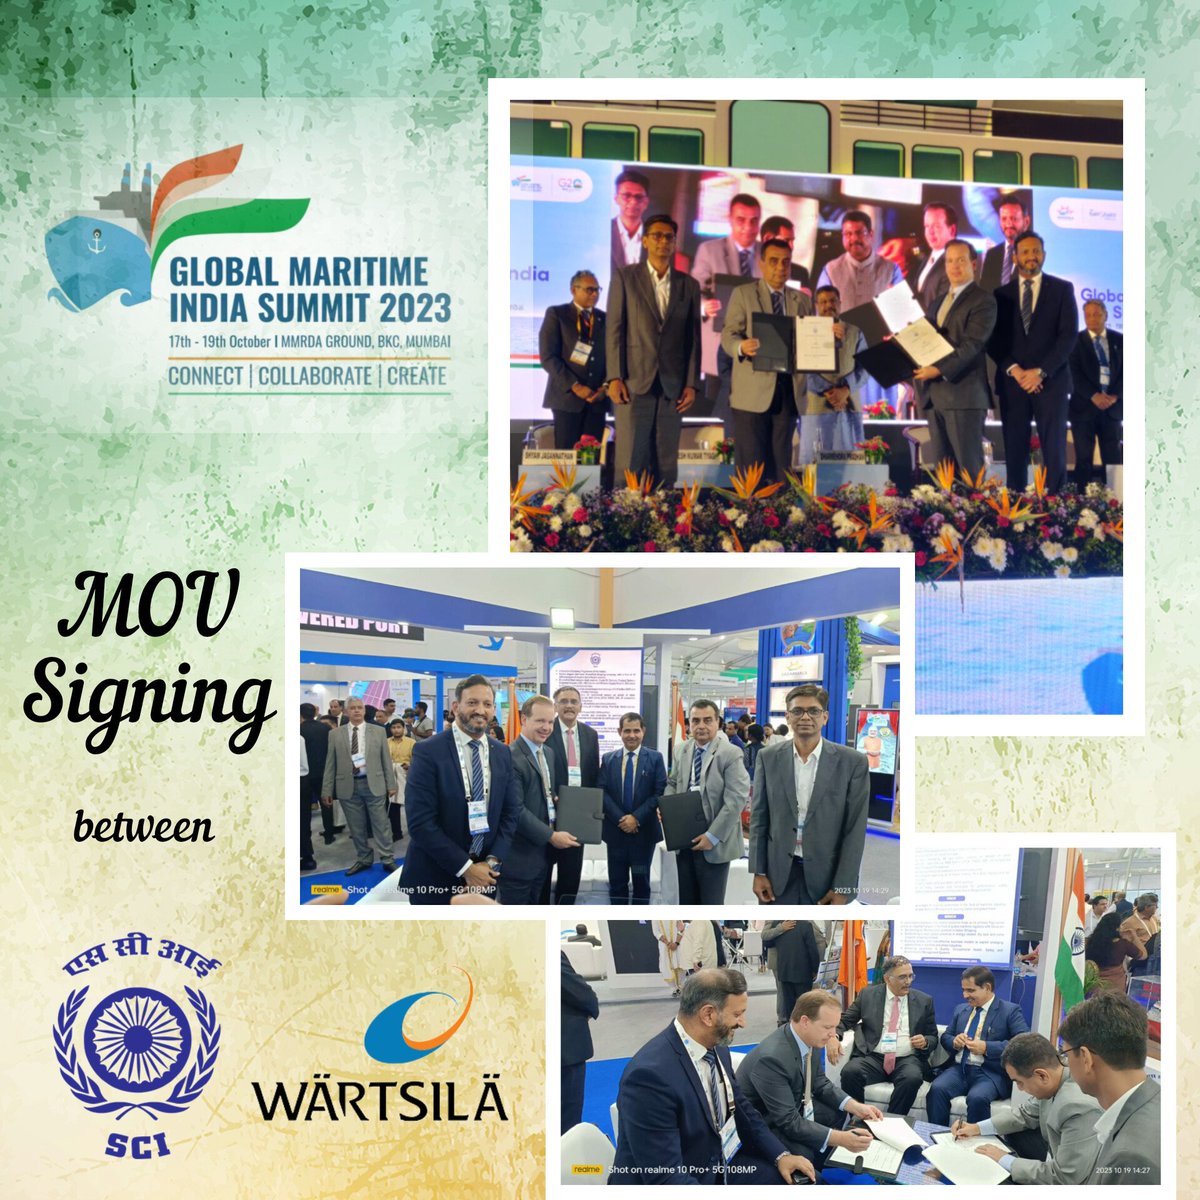 As a testimony to our commitment towards #GreenShipping & #Decarbonization, SCI signs a monumental MOU with Wartsila India Pvt Ltd @wartsilacorp at #GlobalMaritimeIndiaSummit speeding up its initiatives for green projects and environment at a projected value of INR 50 Crores.